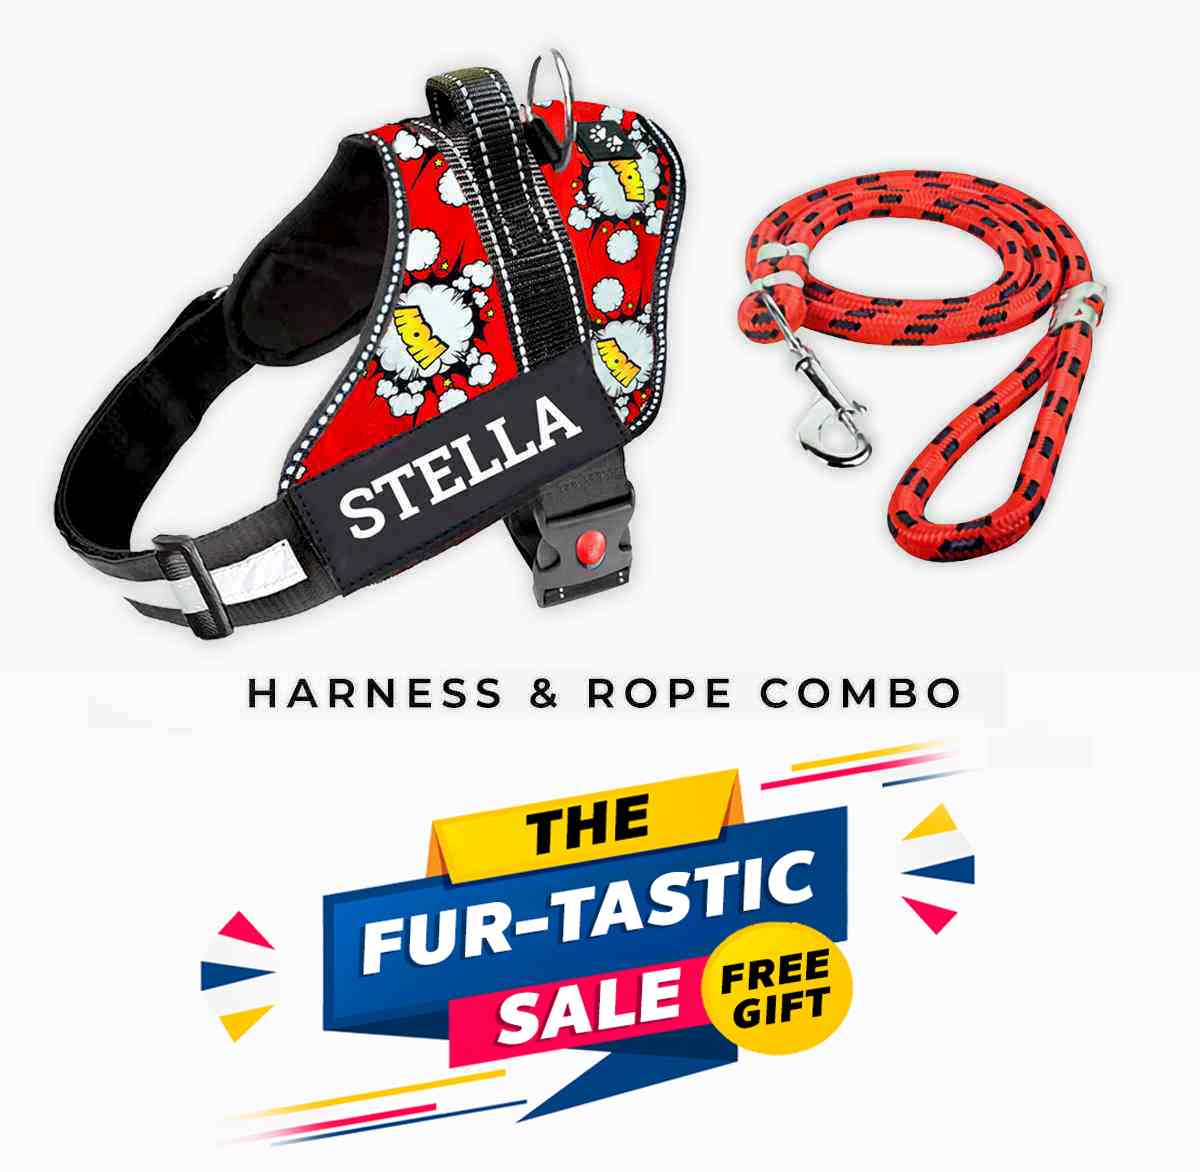 Personalized Dog Harness - WoWTASTIC